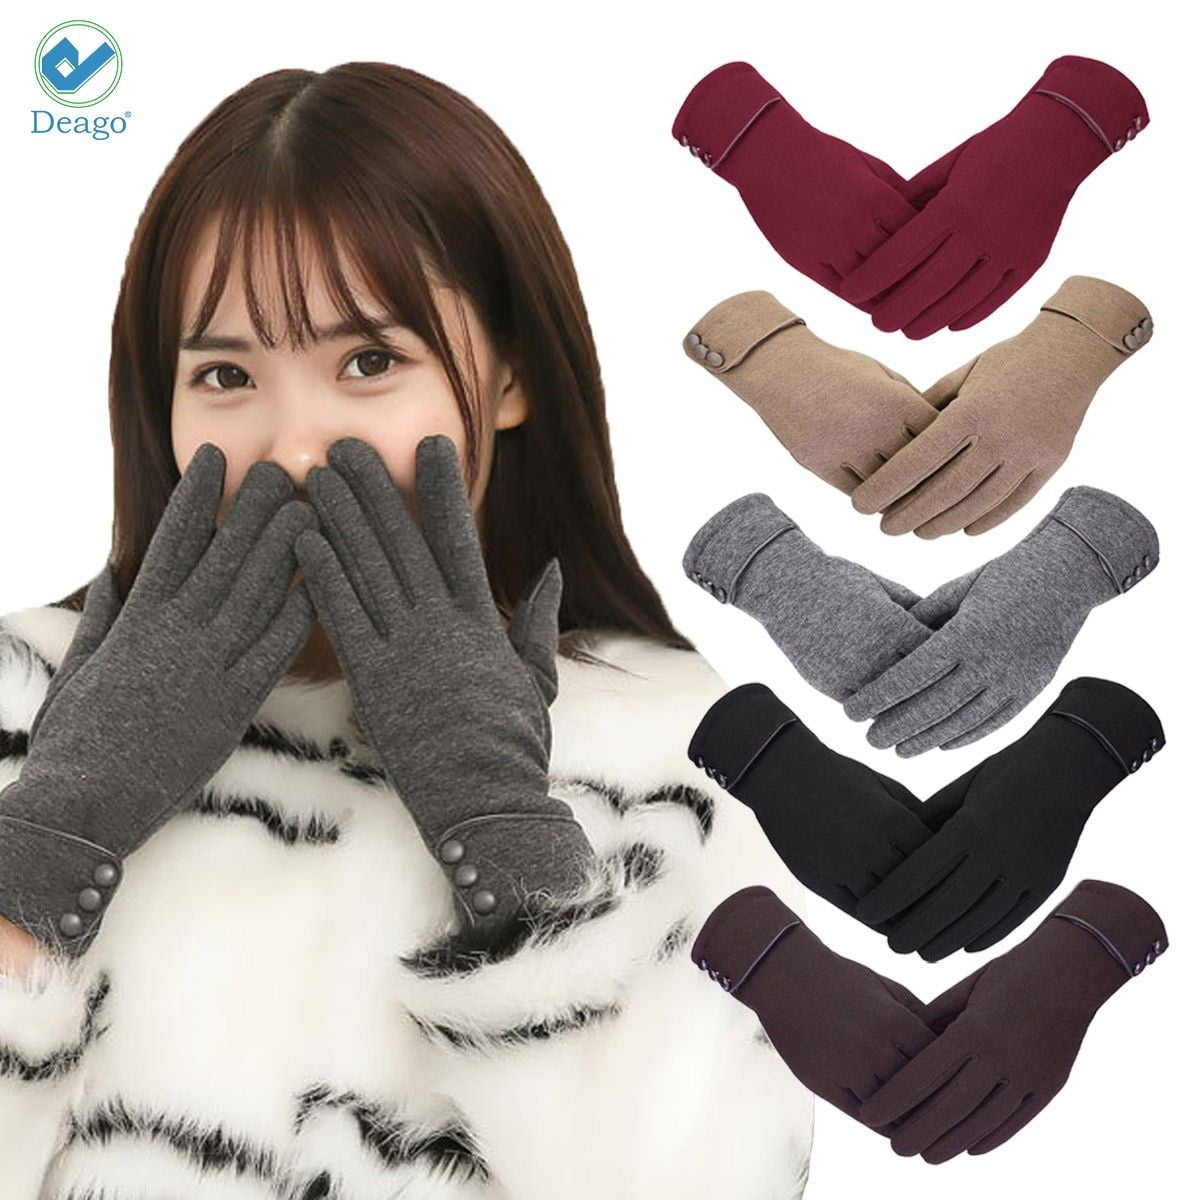 Fleece Lined Windproof Gloves Womens Winter Warm Gloves With Sensitive Touch Screen Texting Fingers